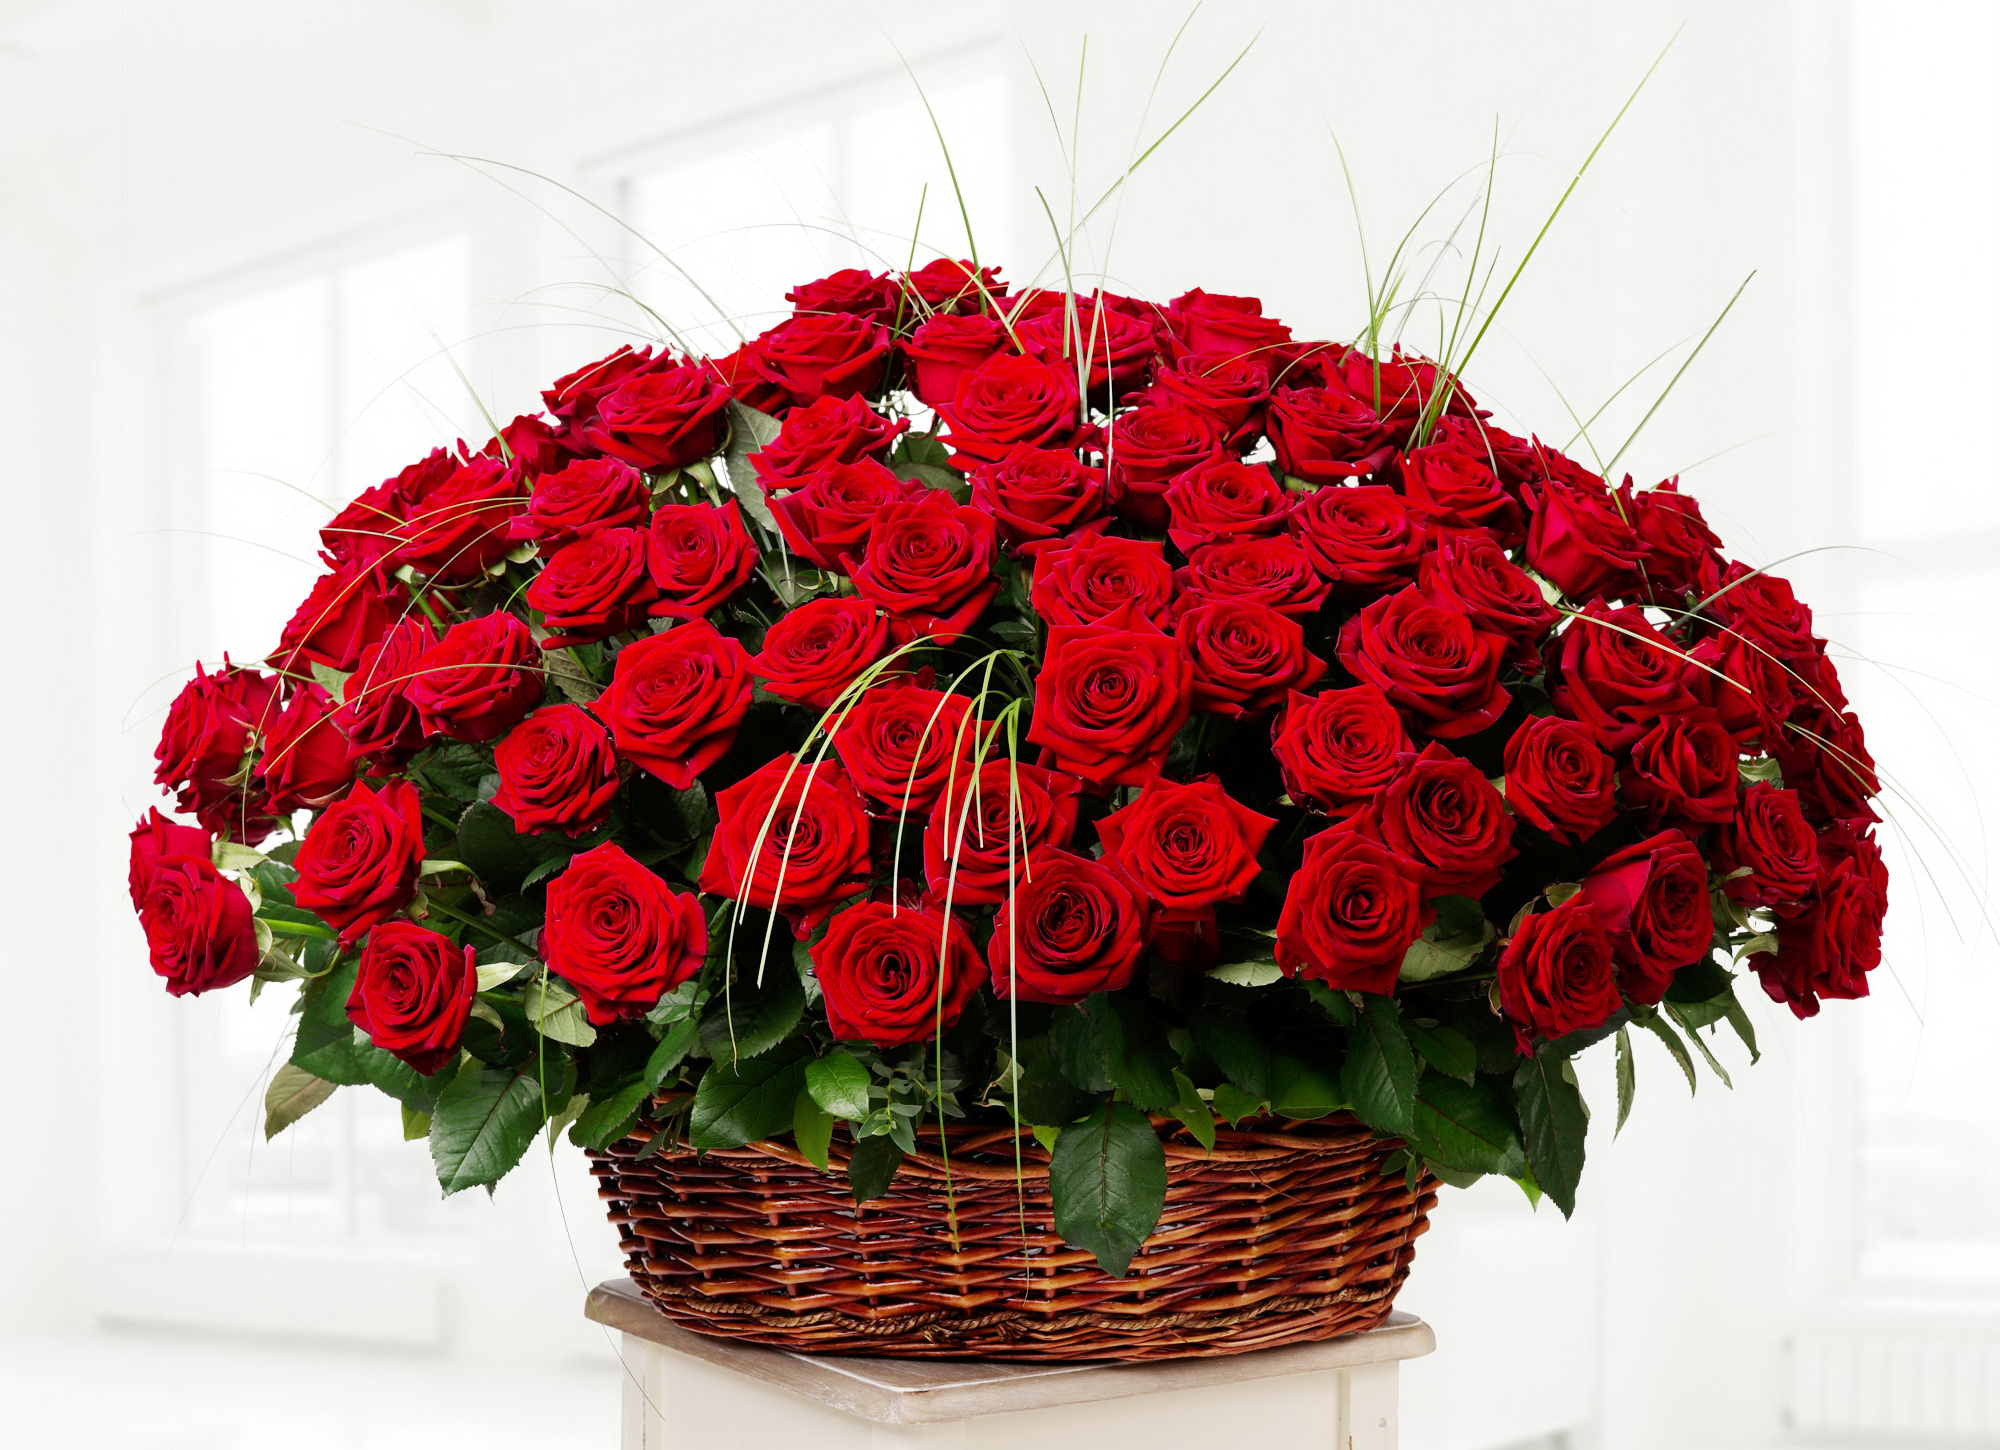 Big bouquet of beautiful red roses in a basket on a white ...